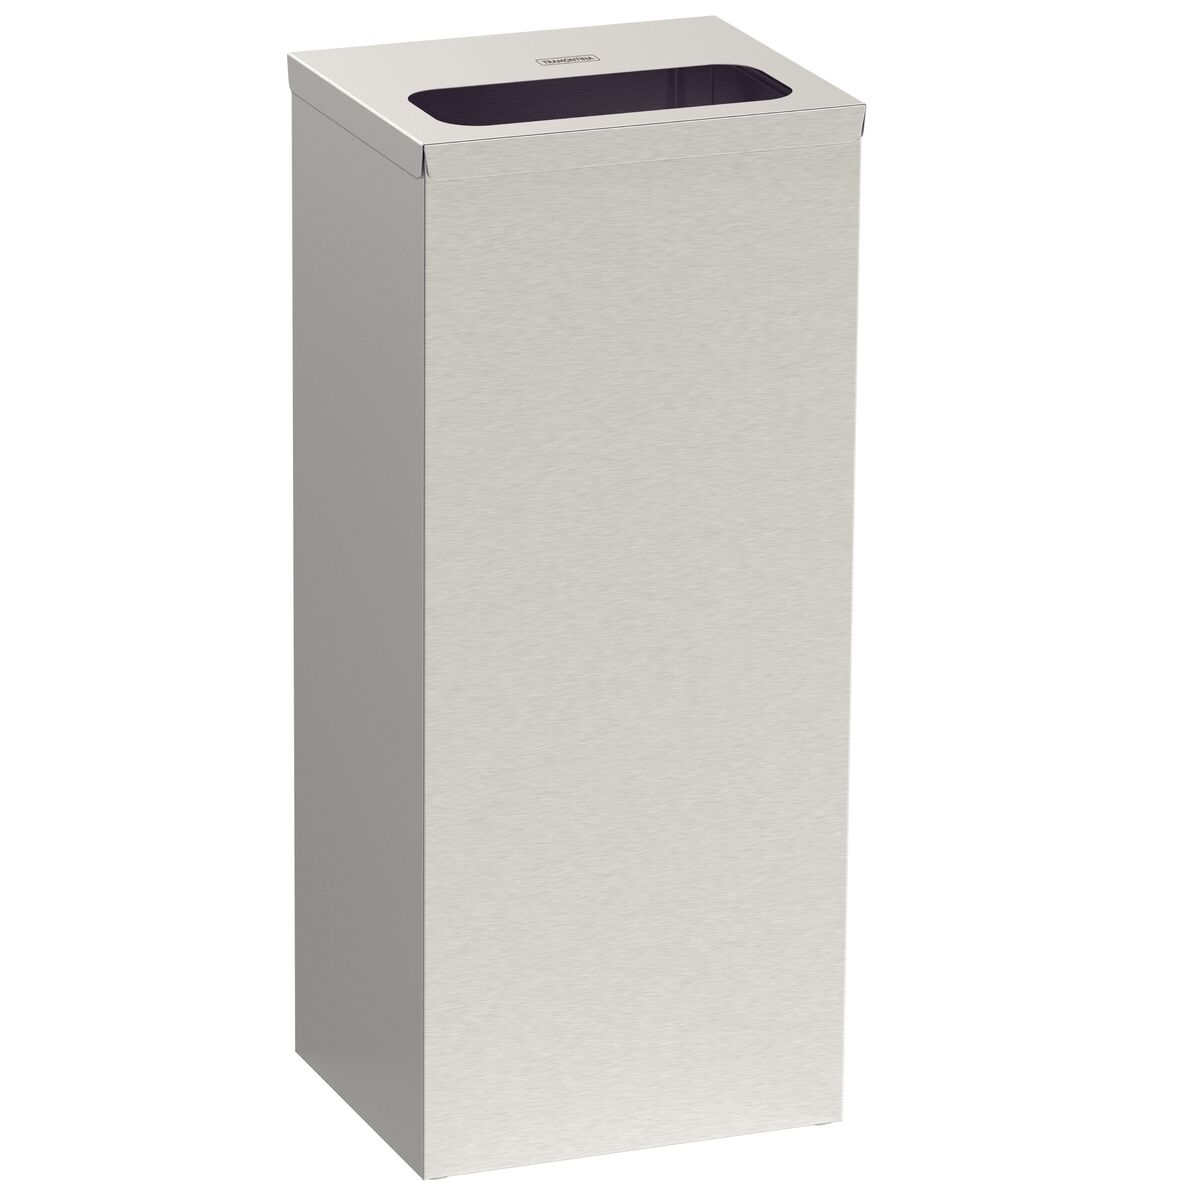 Tramontina 50L stainless steel trash bin with a Scotch Brite finish